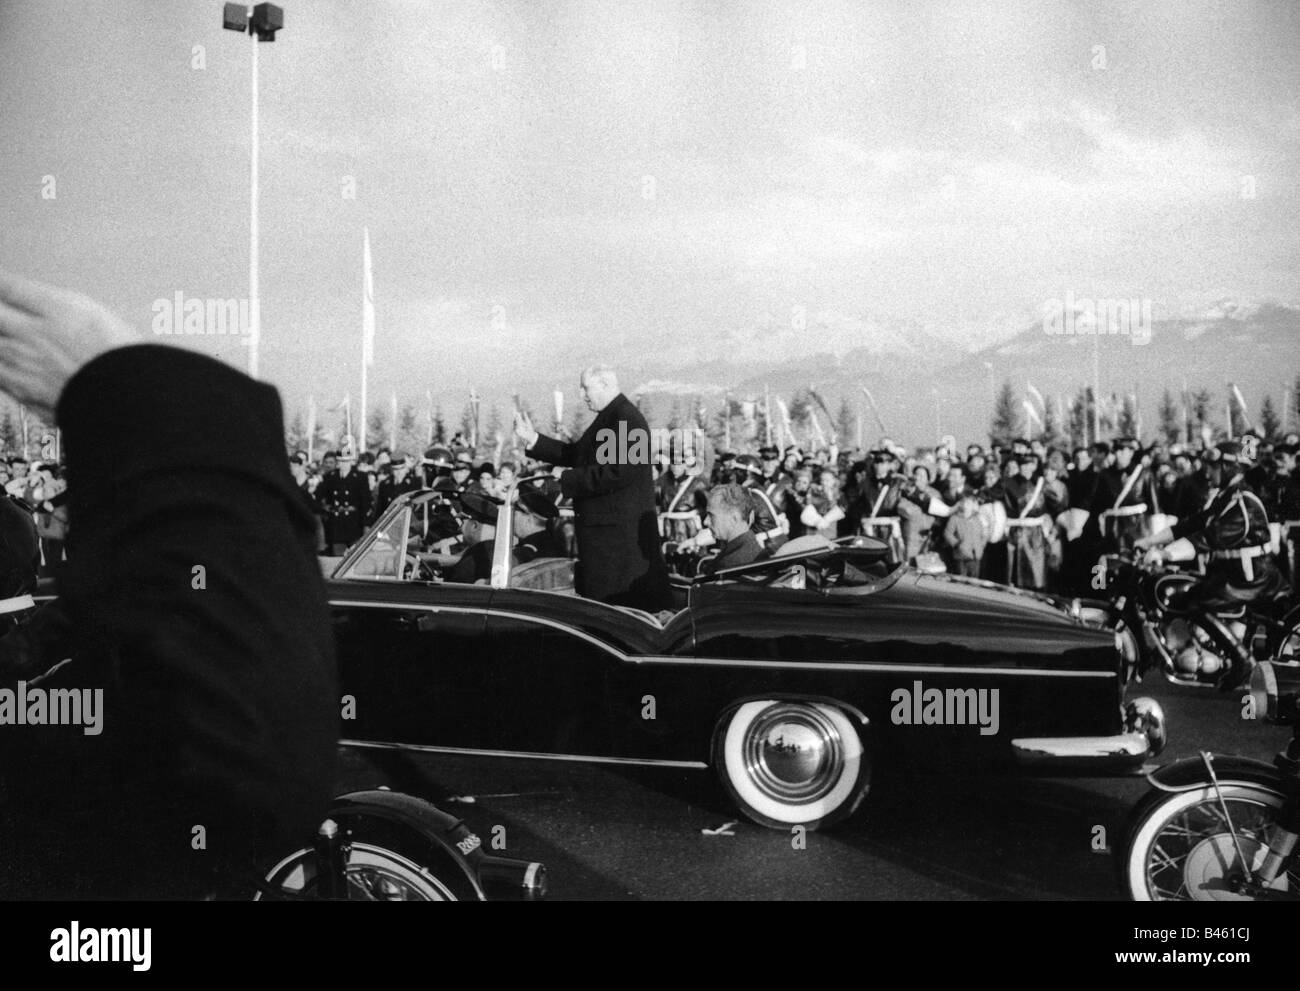 sport, Olympic Games, Grenoble, 6.2.1968 - 18.23.1968, opening, arrival of President Charles de Gaulle, 6.2.1968, car, X olympiad, winter games, France, 20th century, historic, historical, people, 1960s, Stock Photo